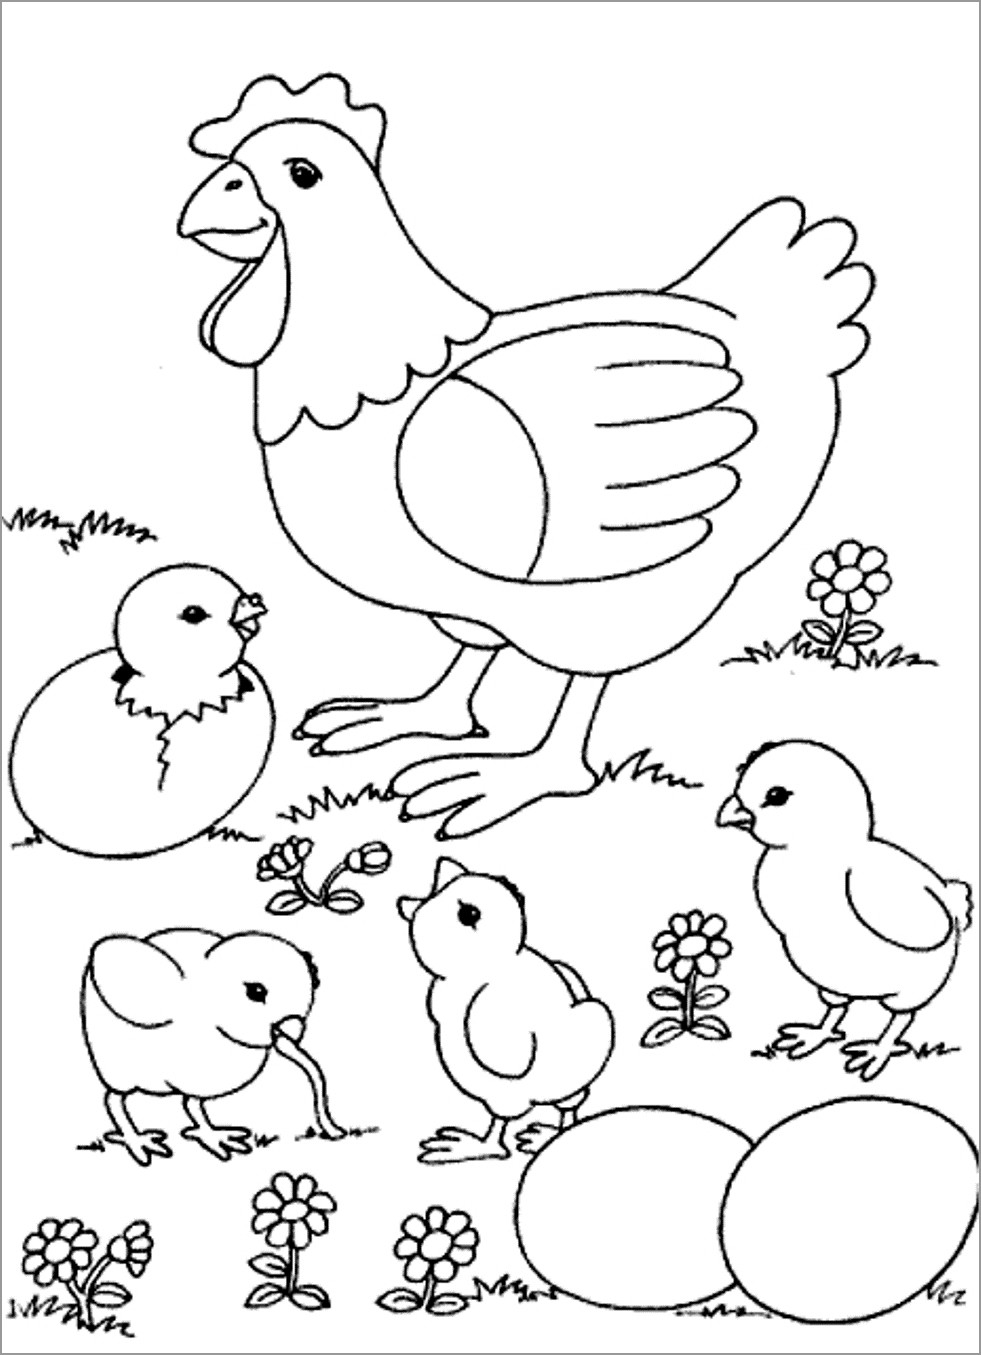 Chicken Coloring Pages - ColoringBay